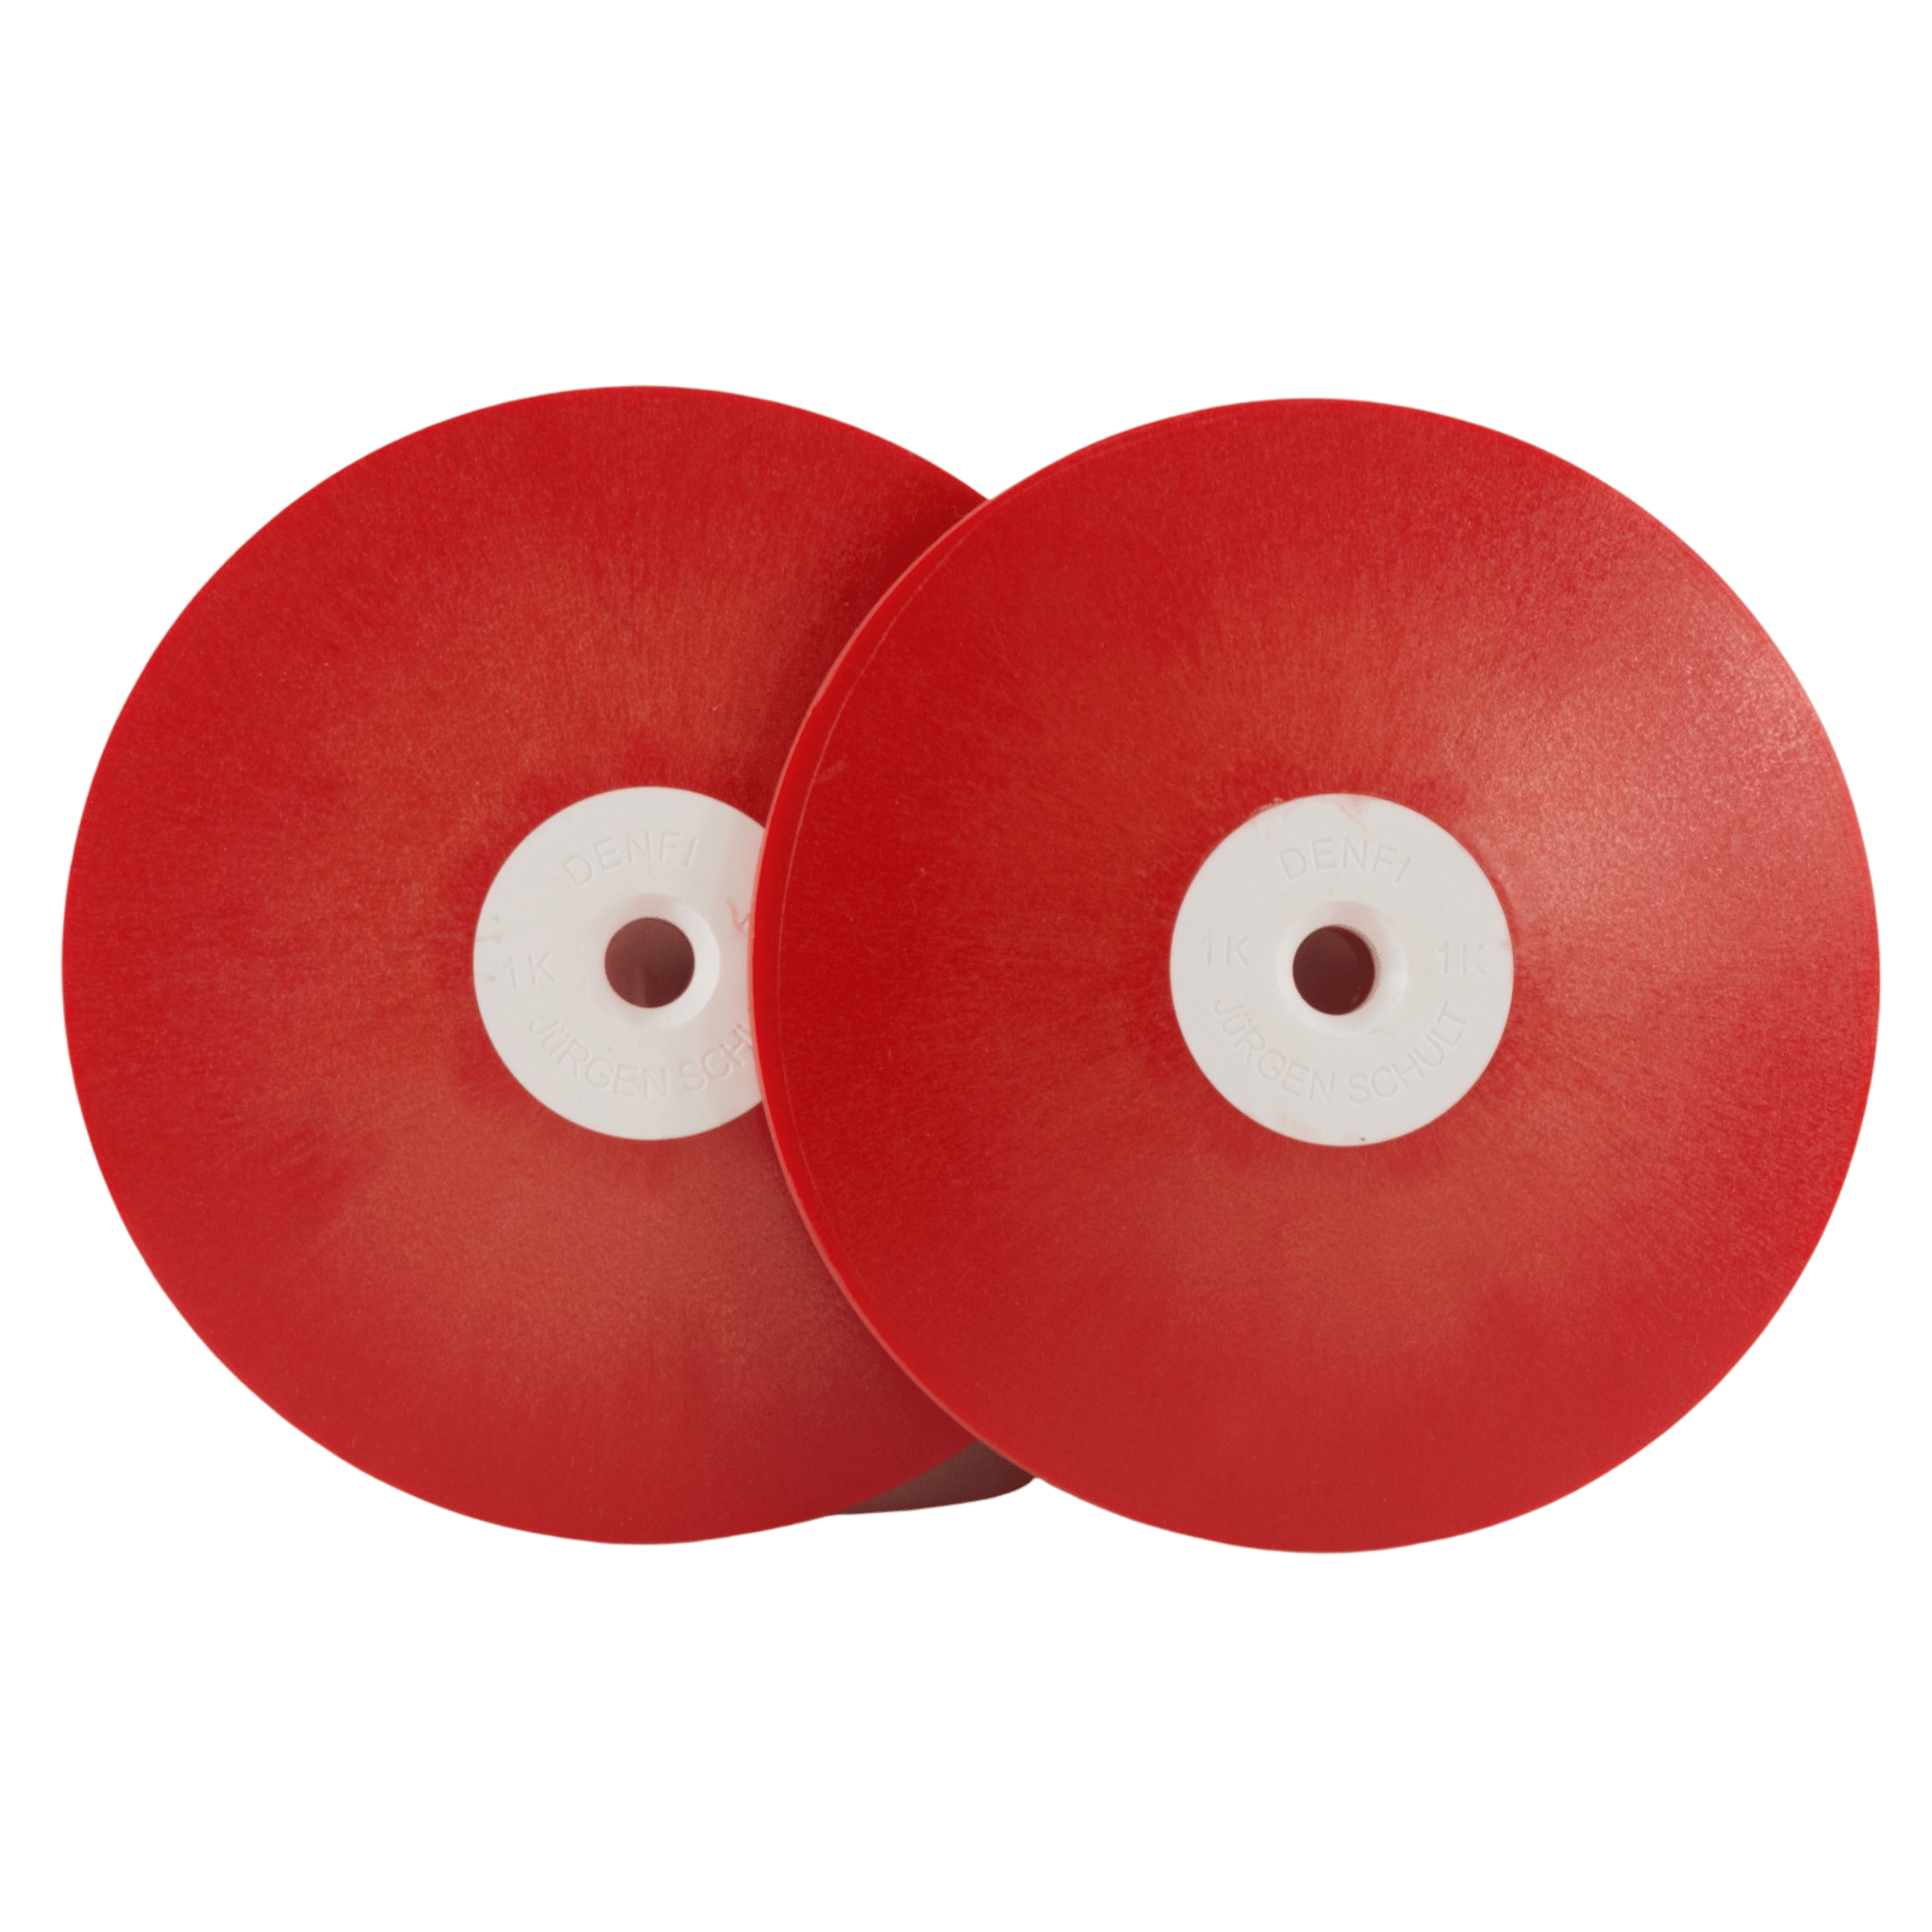 Denfi replacement side plates for discus red